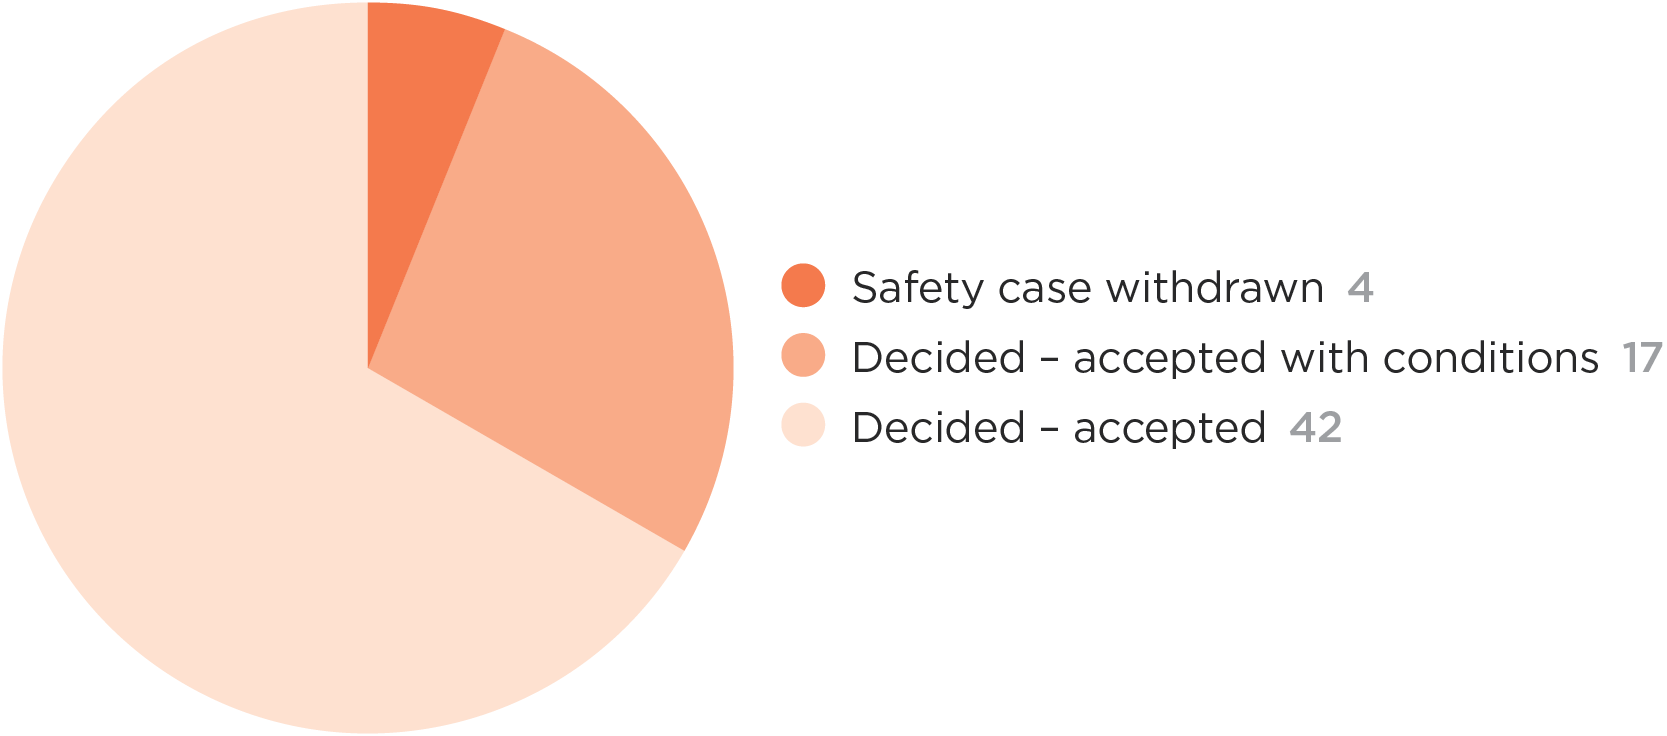 [image] Pie chart showing safety case progress 